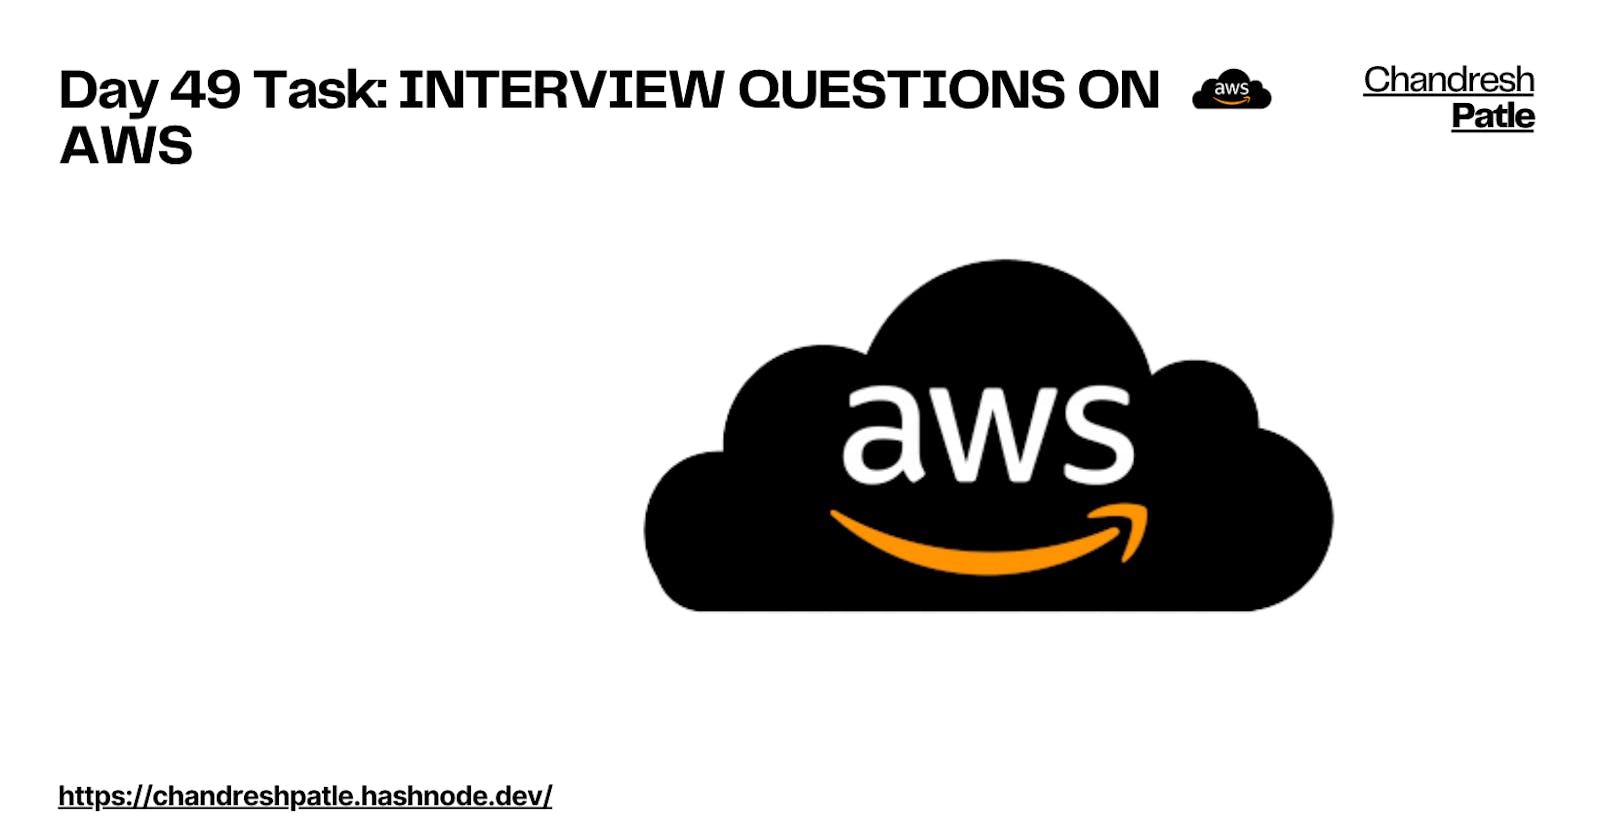 Day 49 Task: INTERVIEW QUESTIONS ON AWS